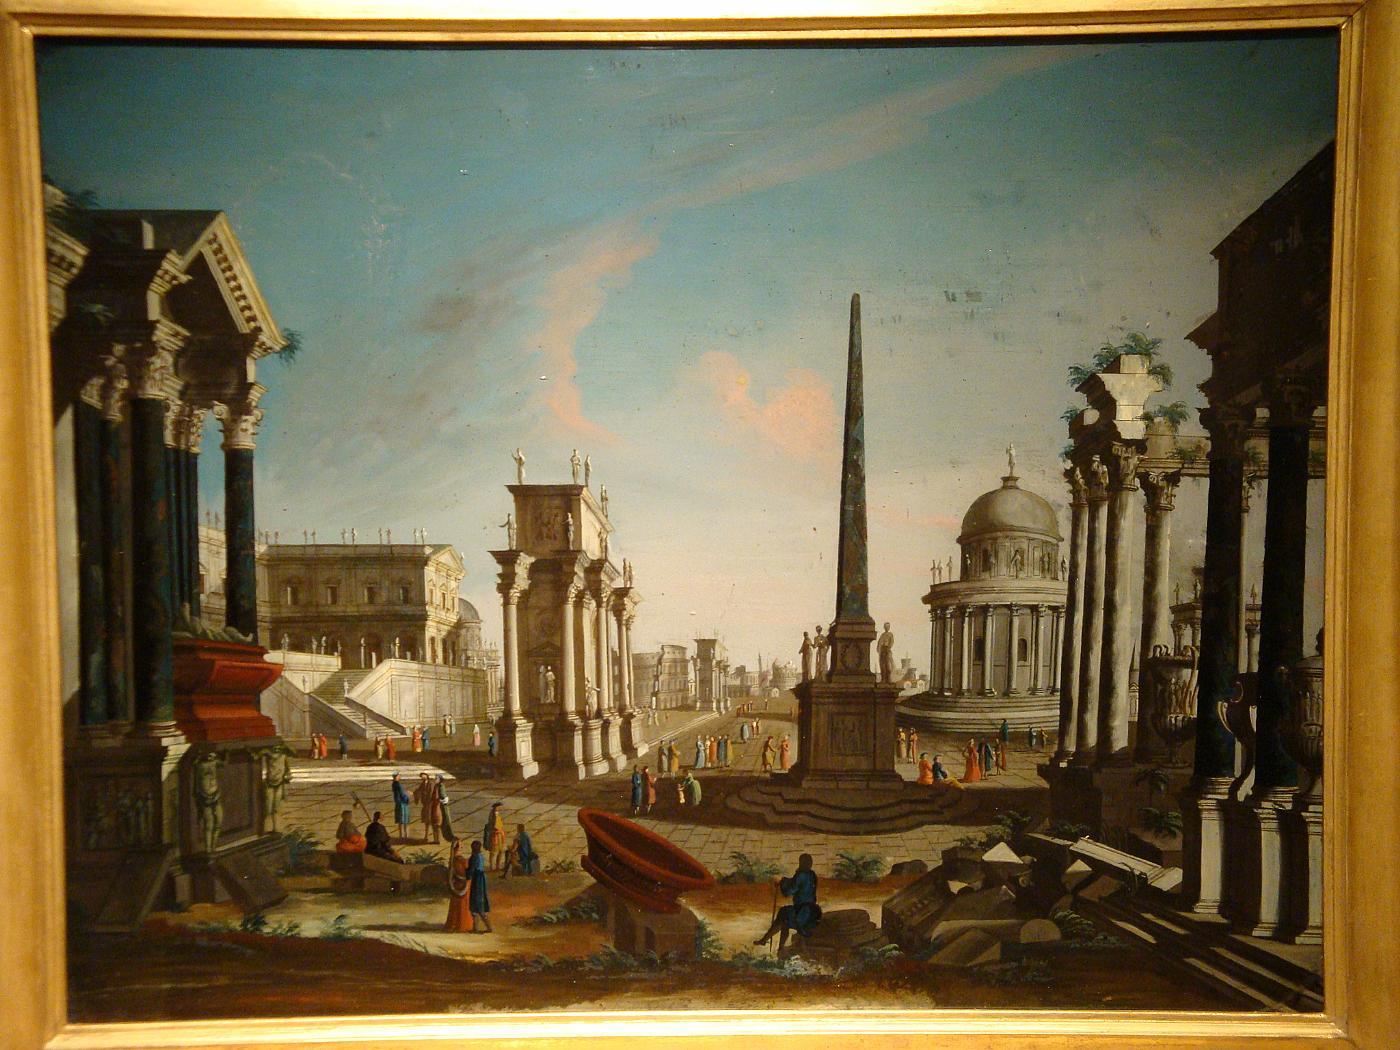 Francesco Chiarottini (1748-1796)
Roman Architectural Capriccio
Oil on glass, cm 52 x 67 without frame, 63.5 x 79cm with frame

The valuable painting, attributed to the Italian painter Francesco Chiarottini and made of oil on glass, represents